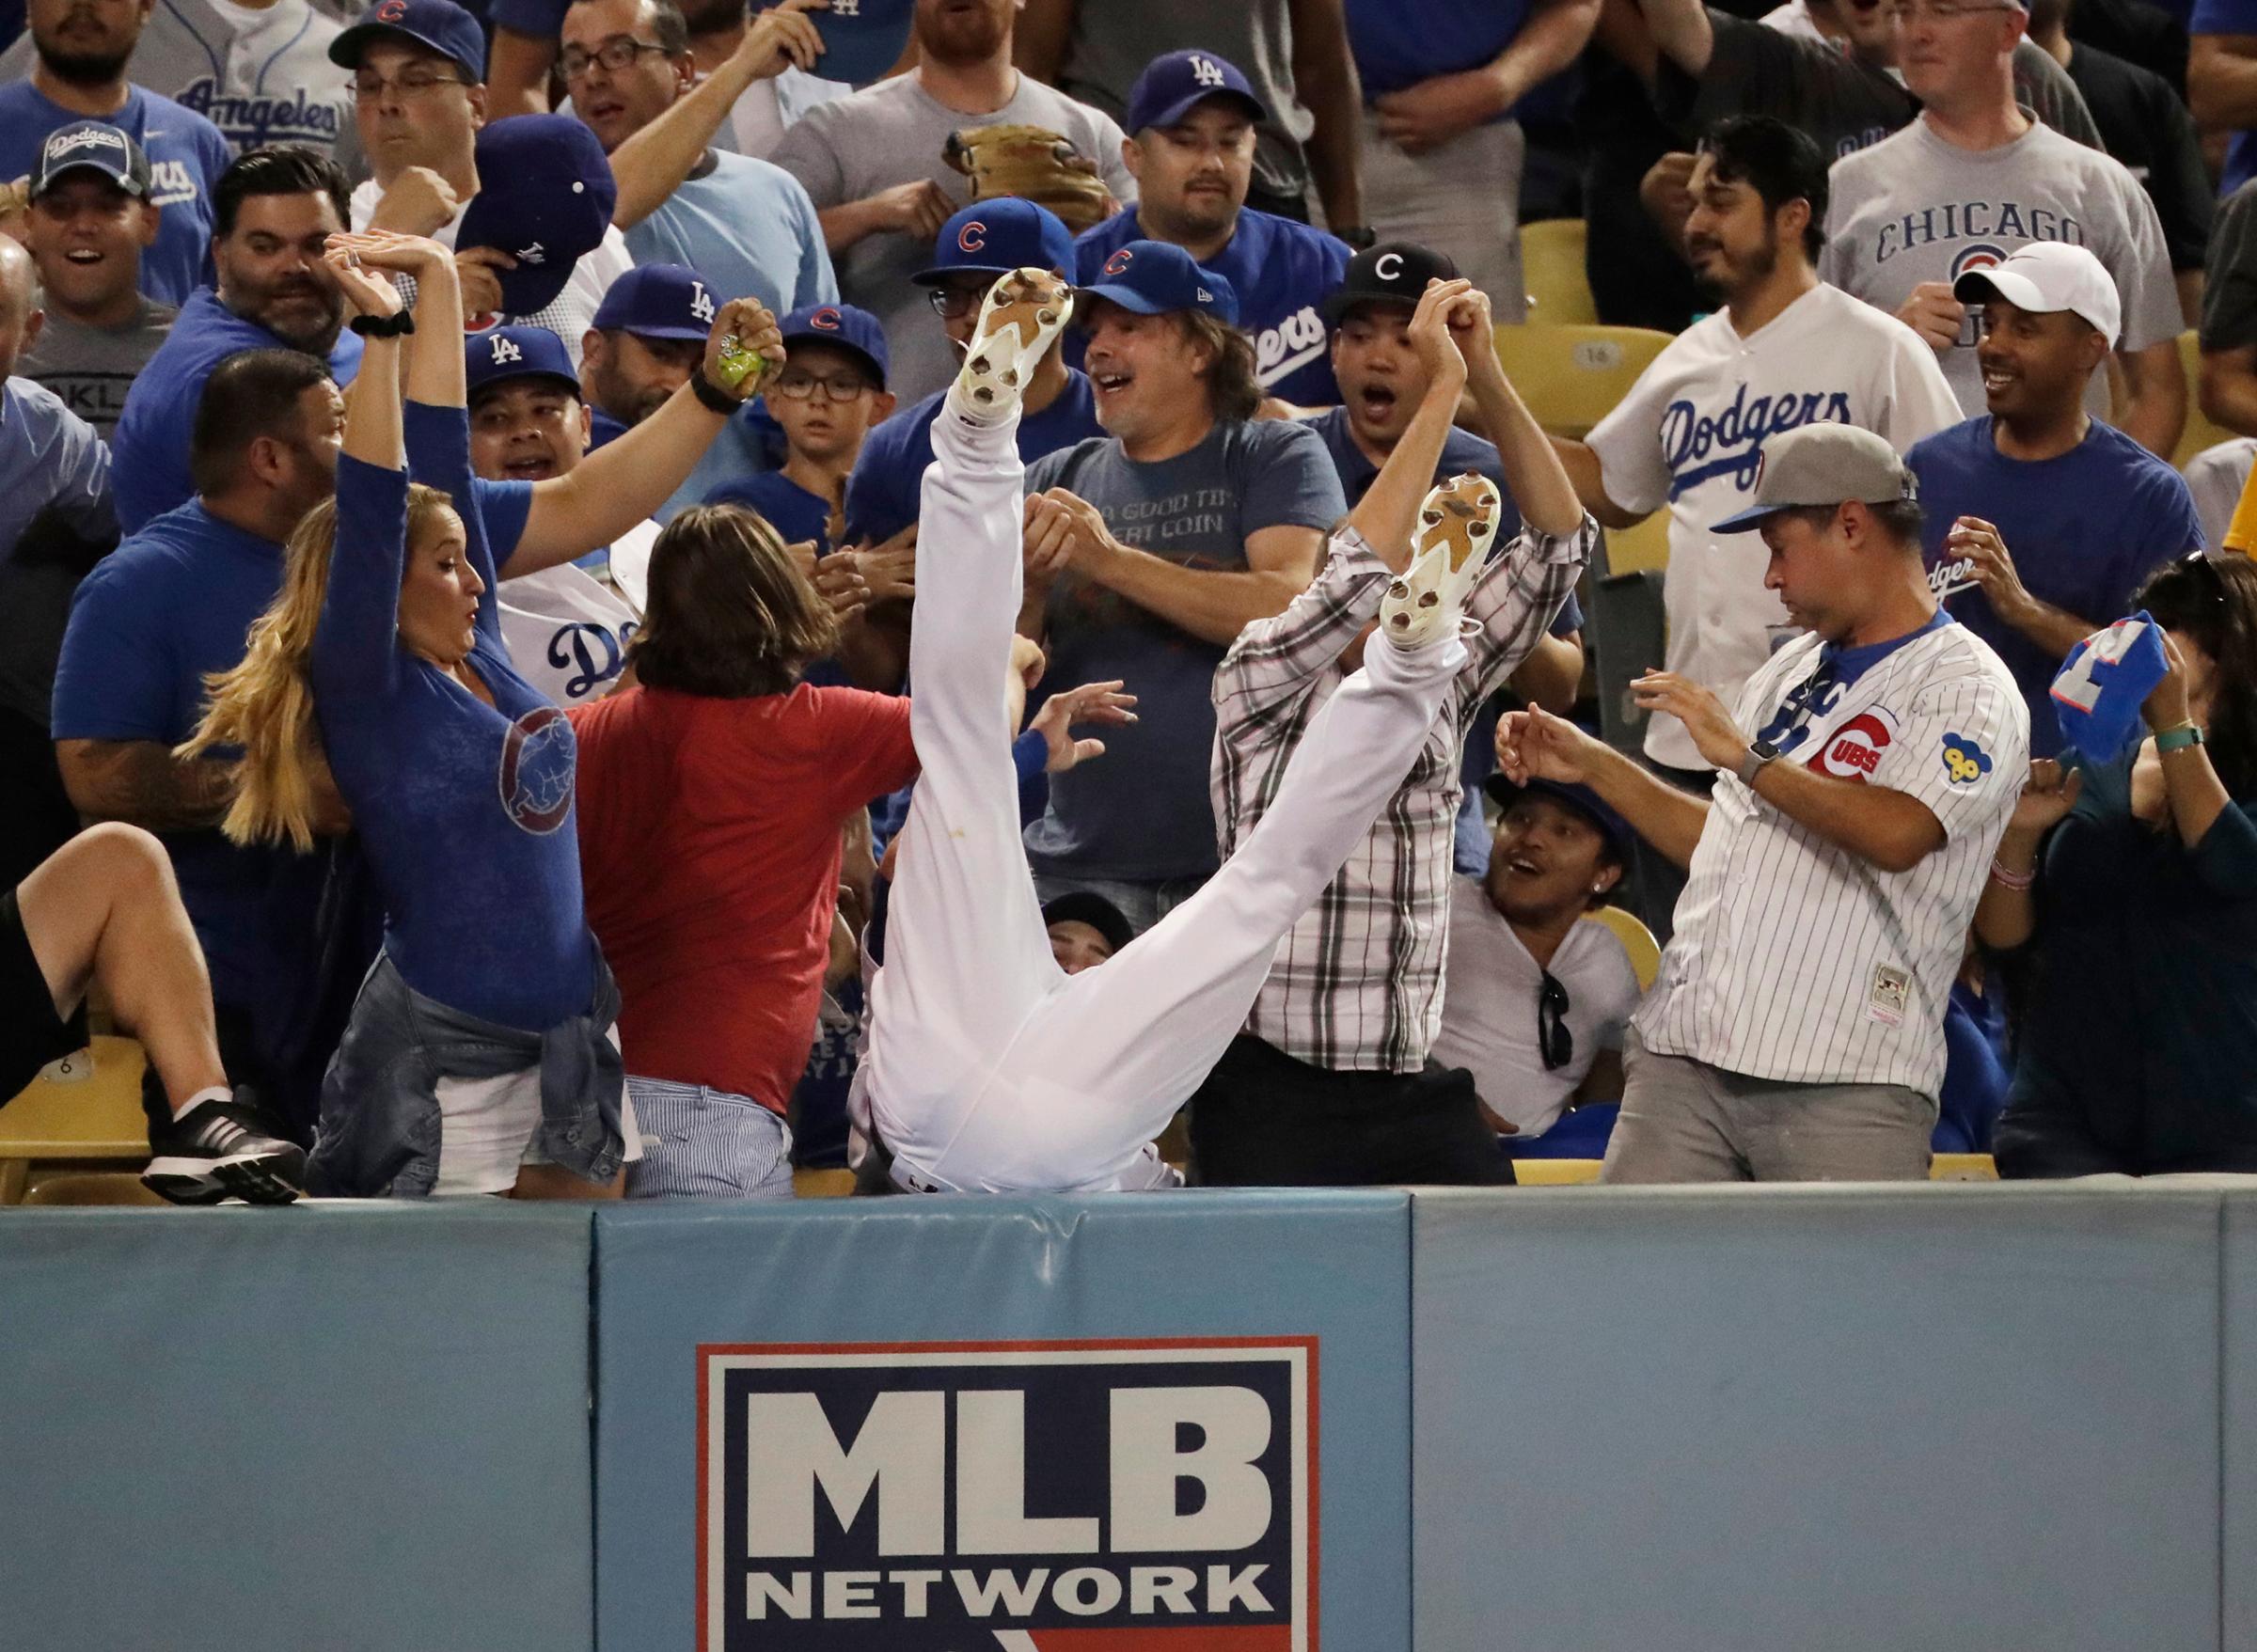 Los Angeles Dodgers right fielder Josh Reddick can't catch a foul ball hit by Chicago Cubs' Ben Zobrist during the fifth inning of Game 4 of the National League baseball championship series, on Oct. 19, 2016, in Los Angeles.